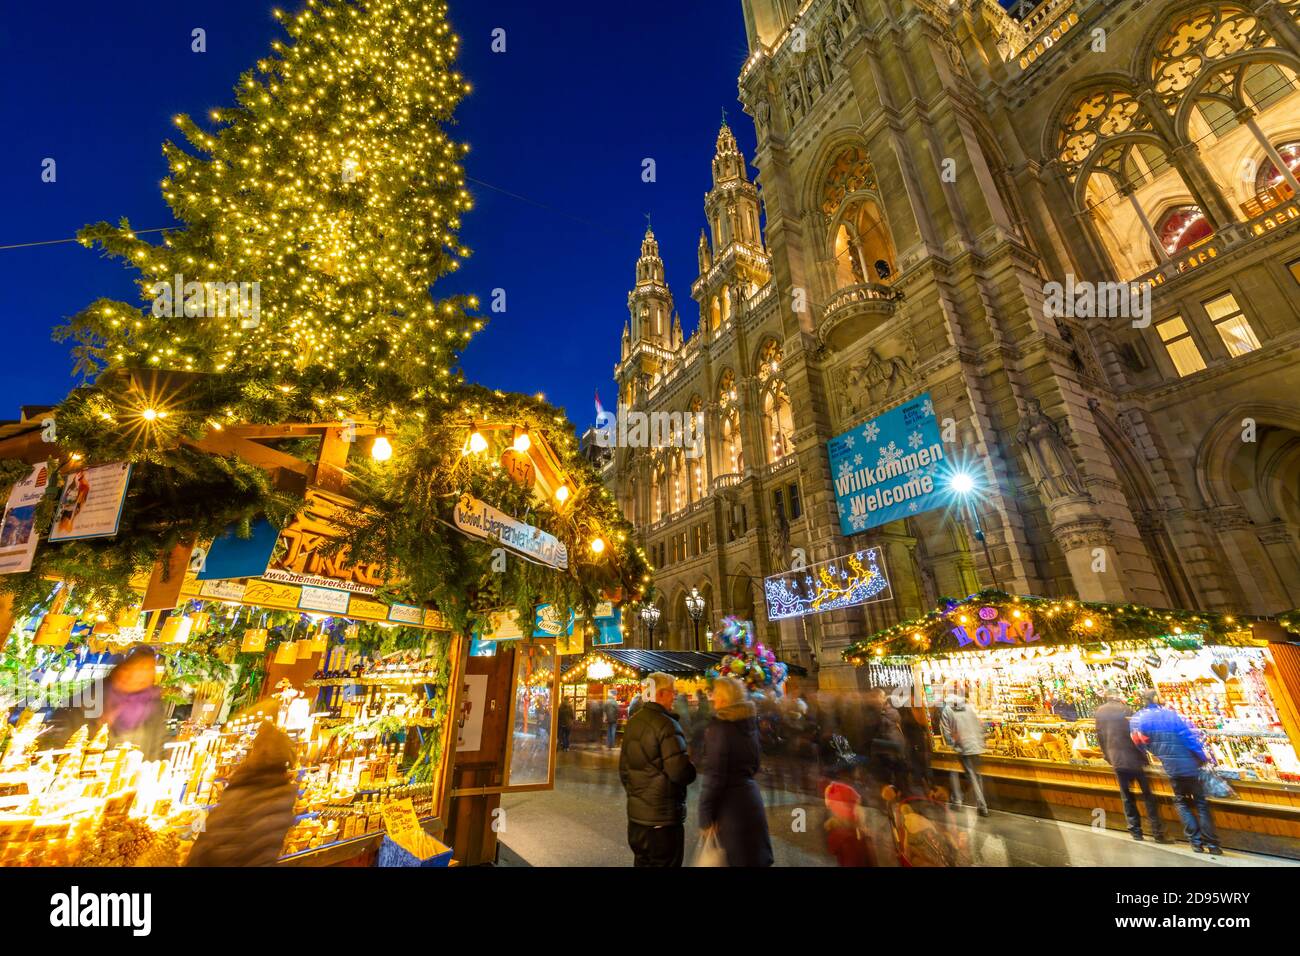 View of New Town Hall and bustling Christmas Market in Marienplatz at dusk, Munich, Bavaria, Germany, Europe Stock Photo